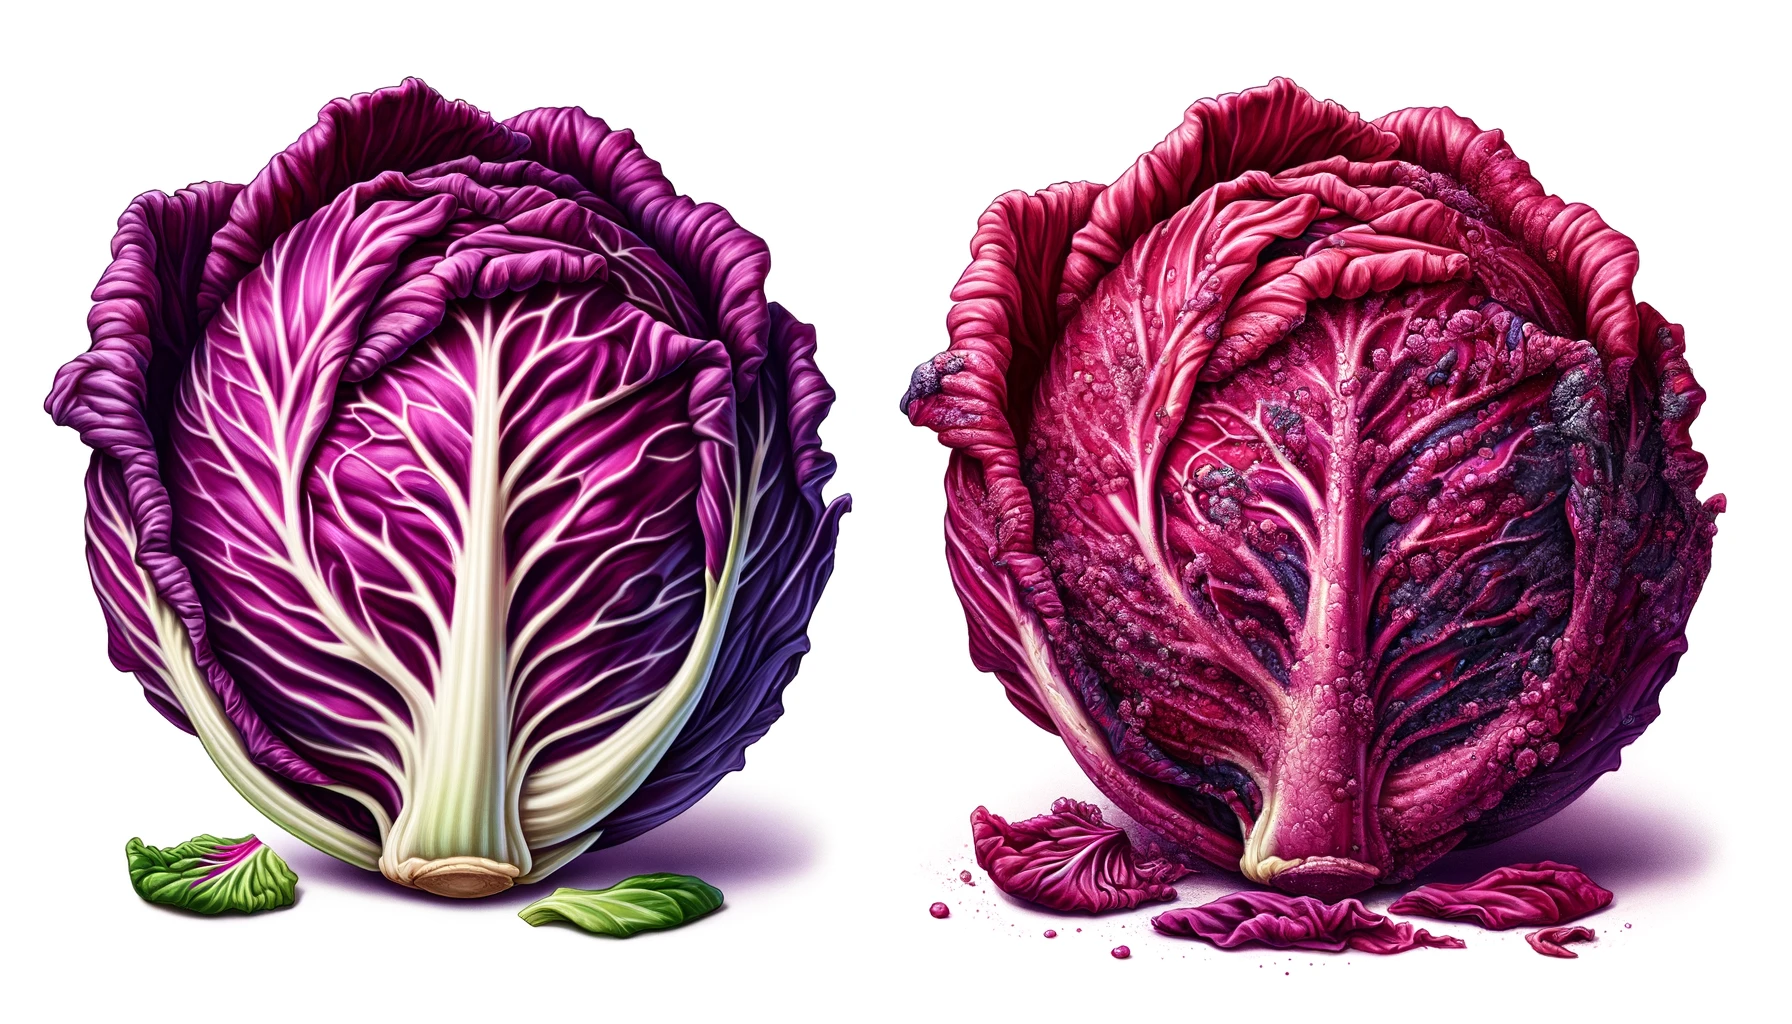 comparison between fresh and spoiled red cabbage